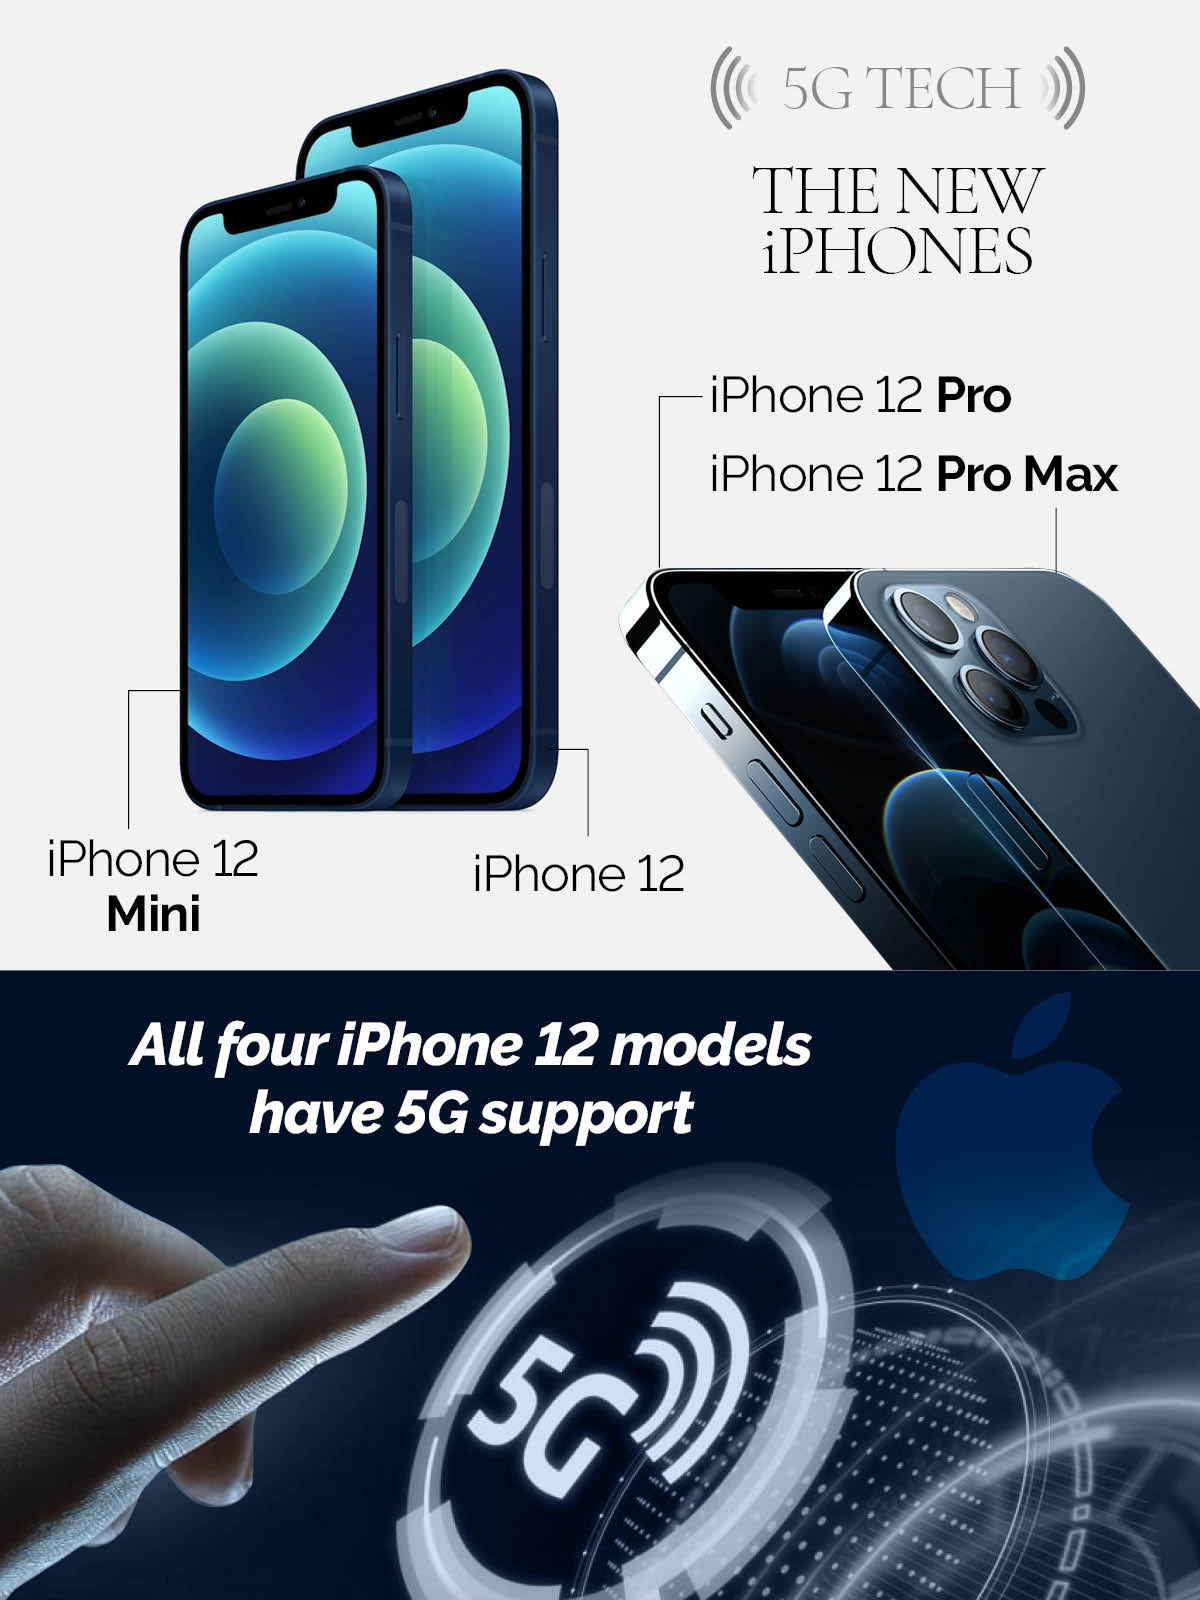 Apple announces iPhone 12: Why is 5G such a big deal?